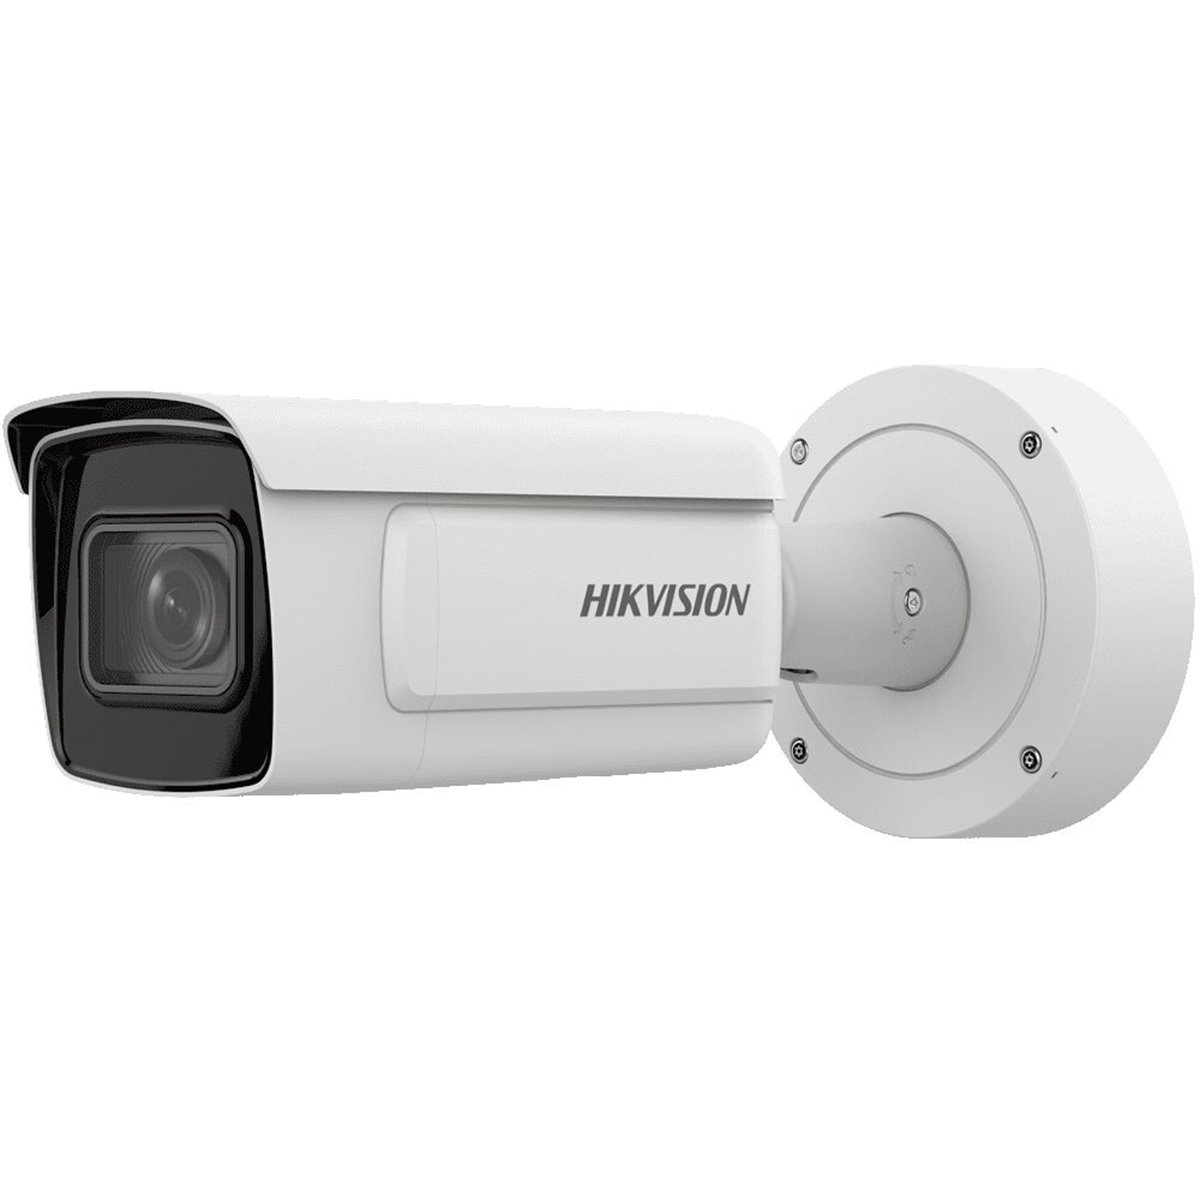 Hikvision Bullet iDS-2CD7A46G0-P-IZHSY 2.8-12mm C - Network Camera